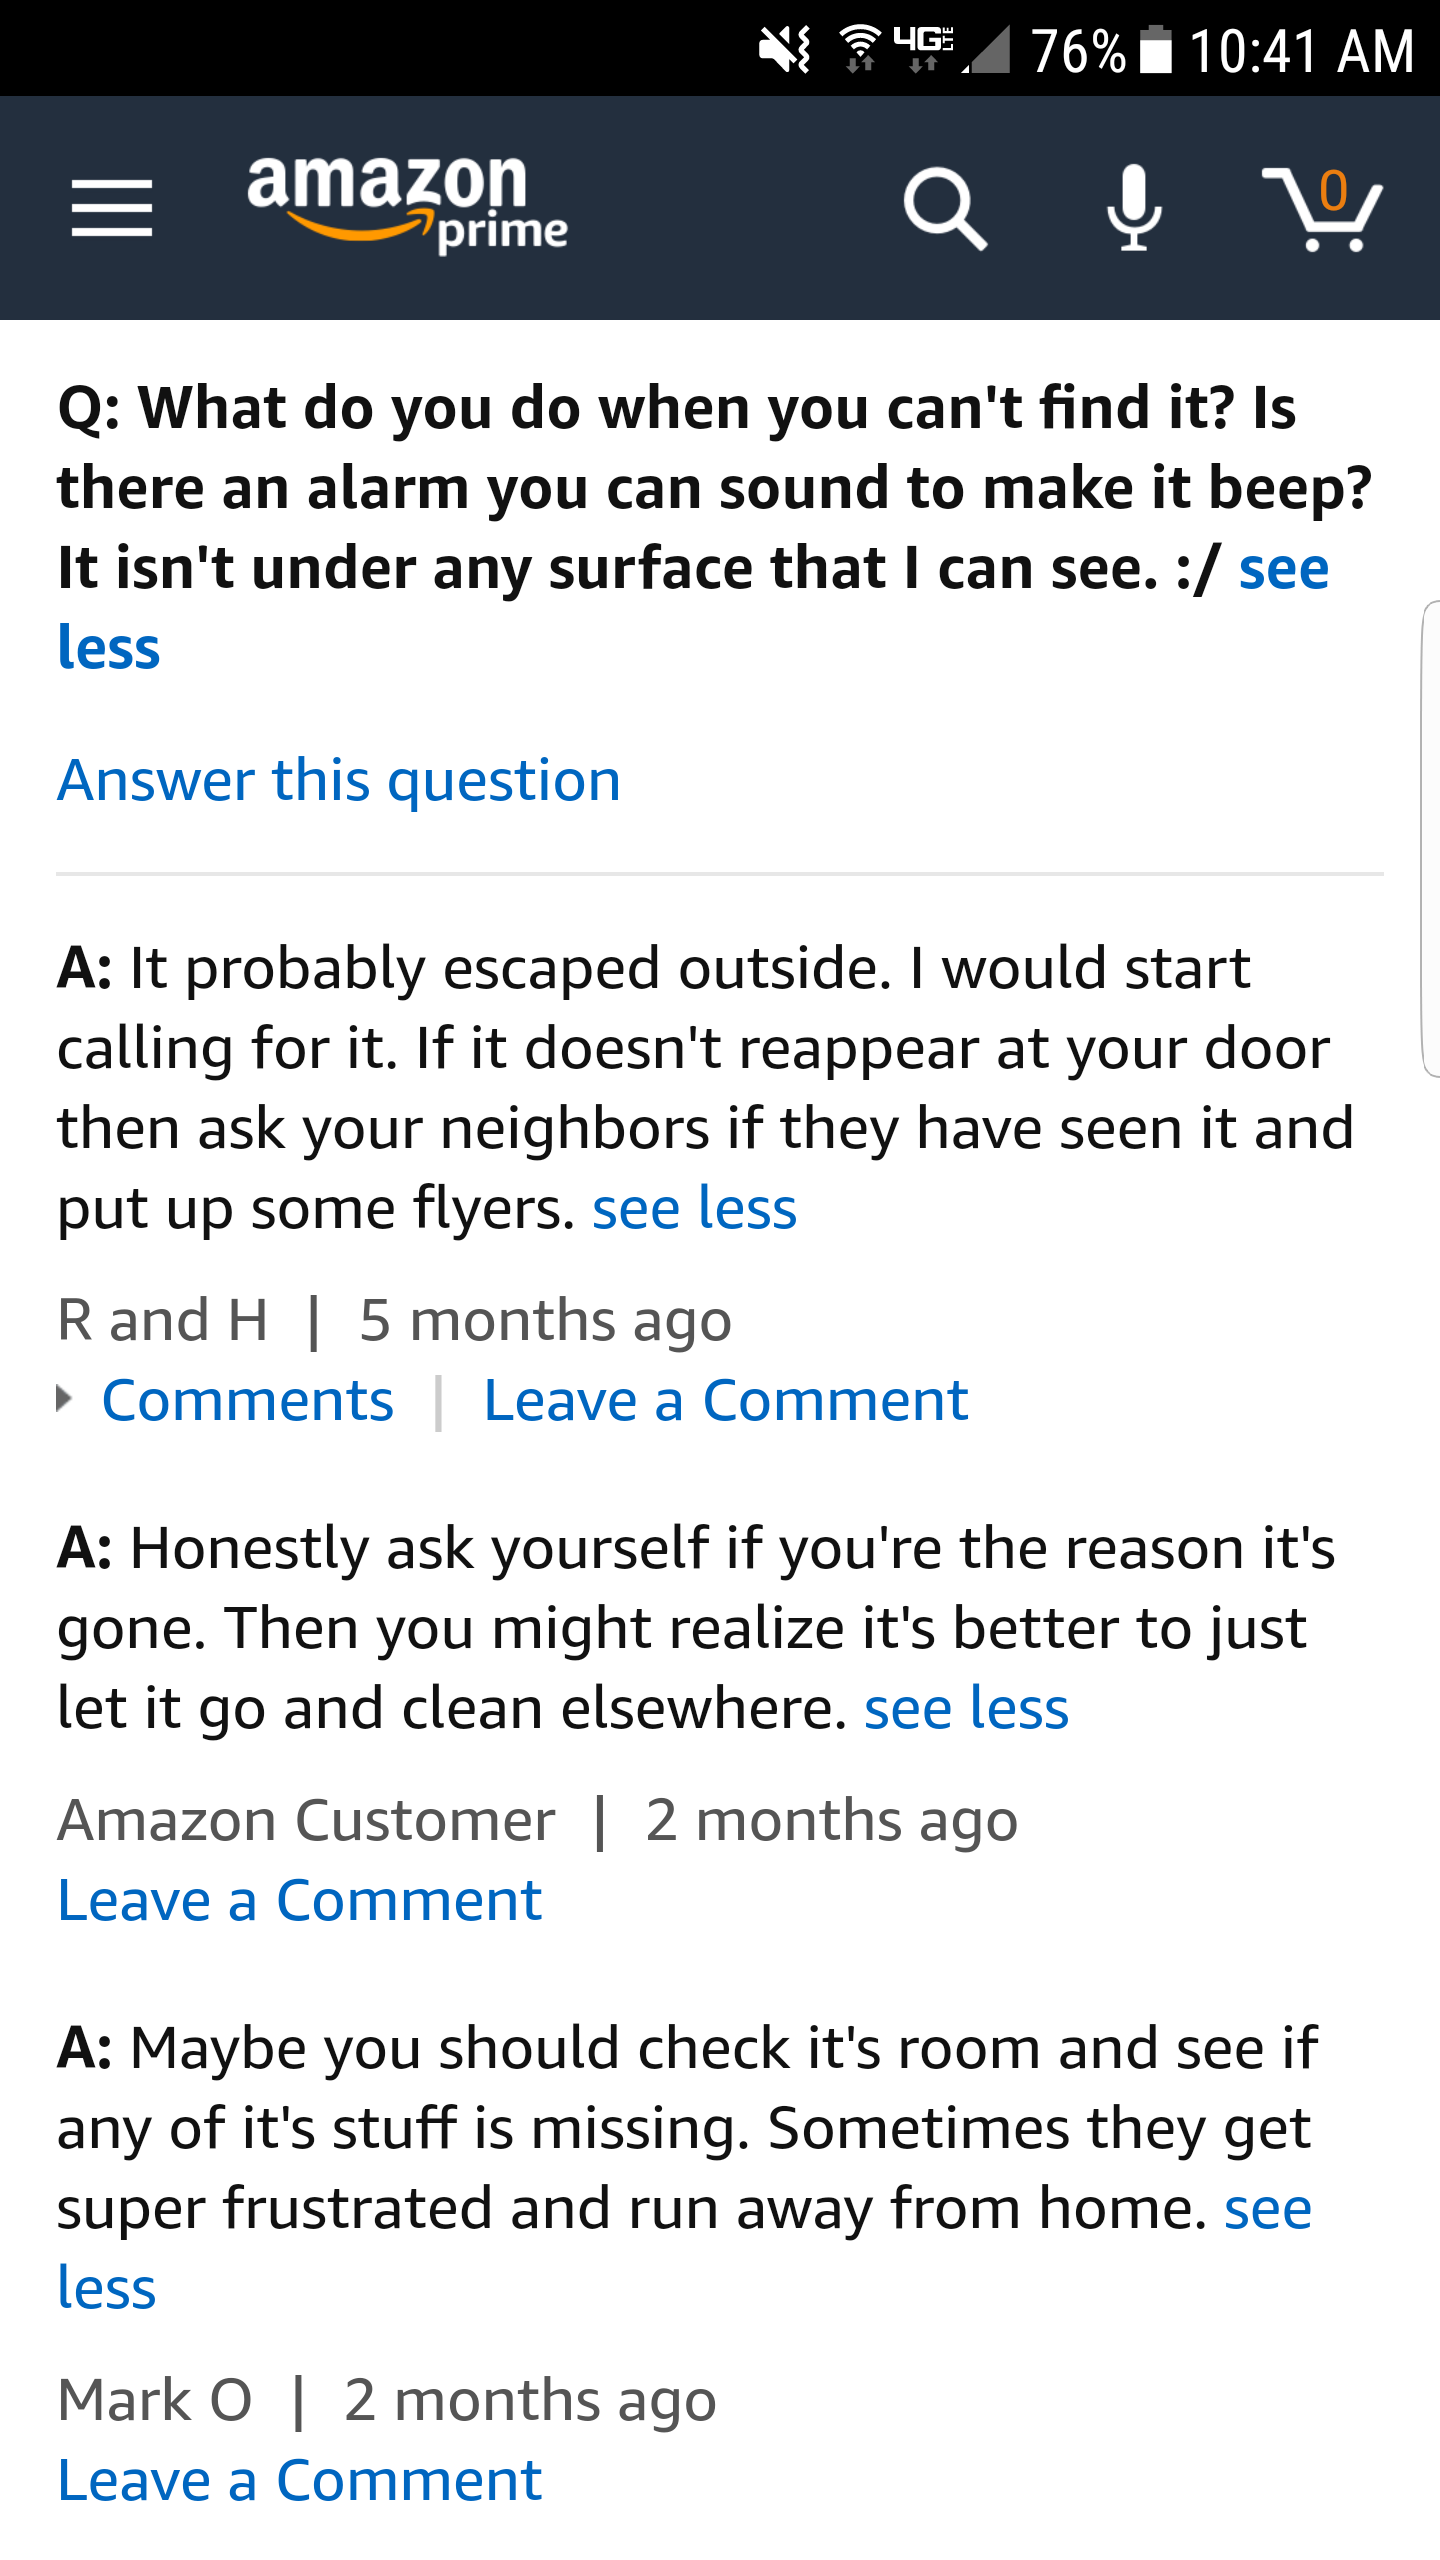 Researching robot vacuums when...